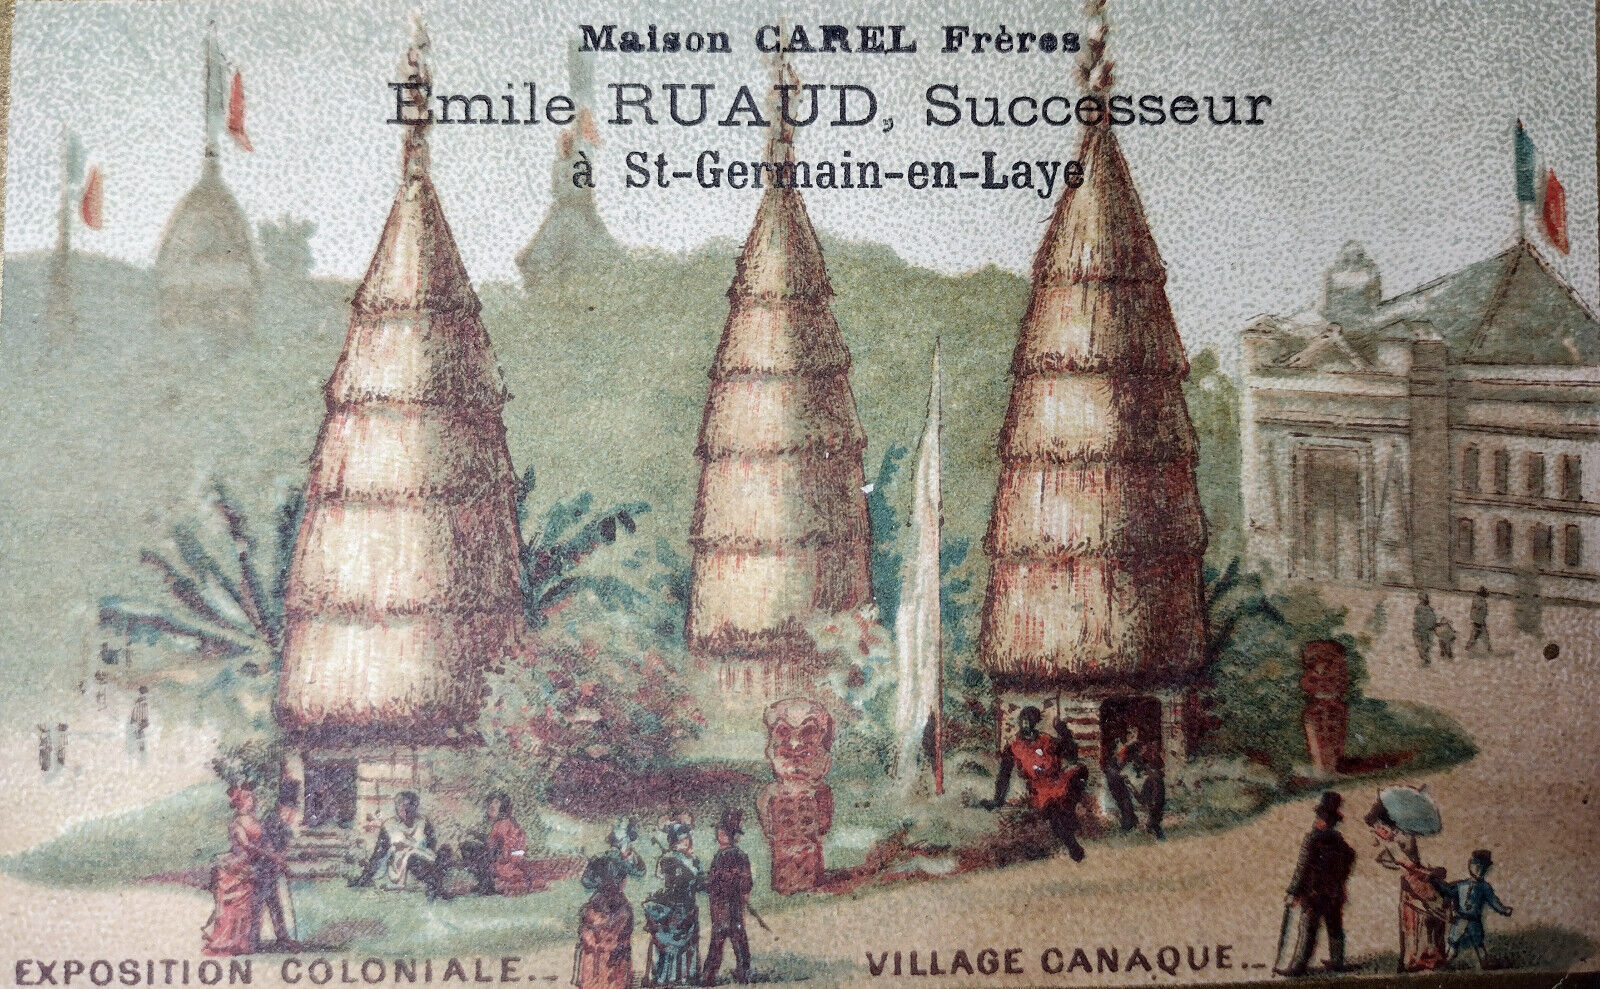 Victorian 1800s French Advertising Trade Card Expo Coloniale Village Canaque